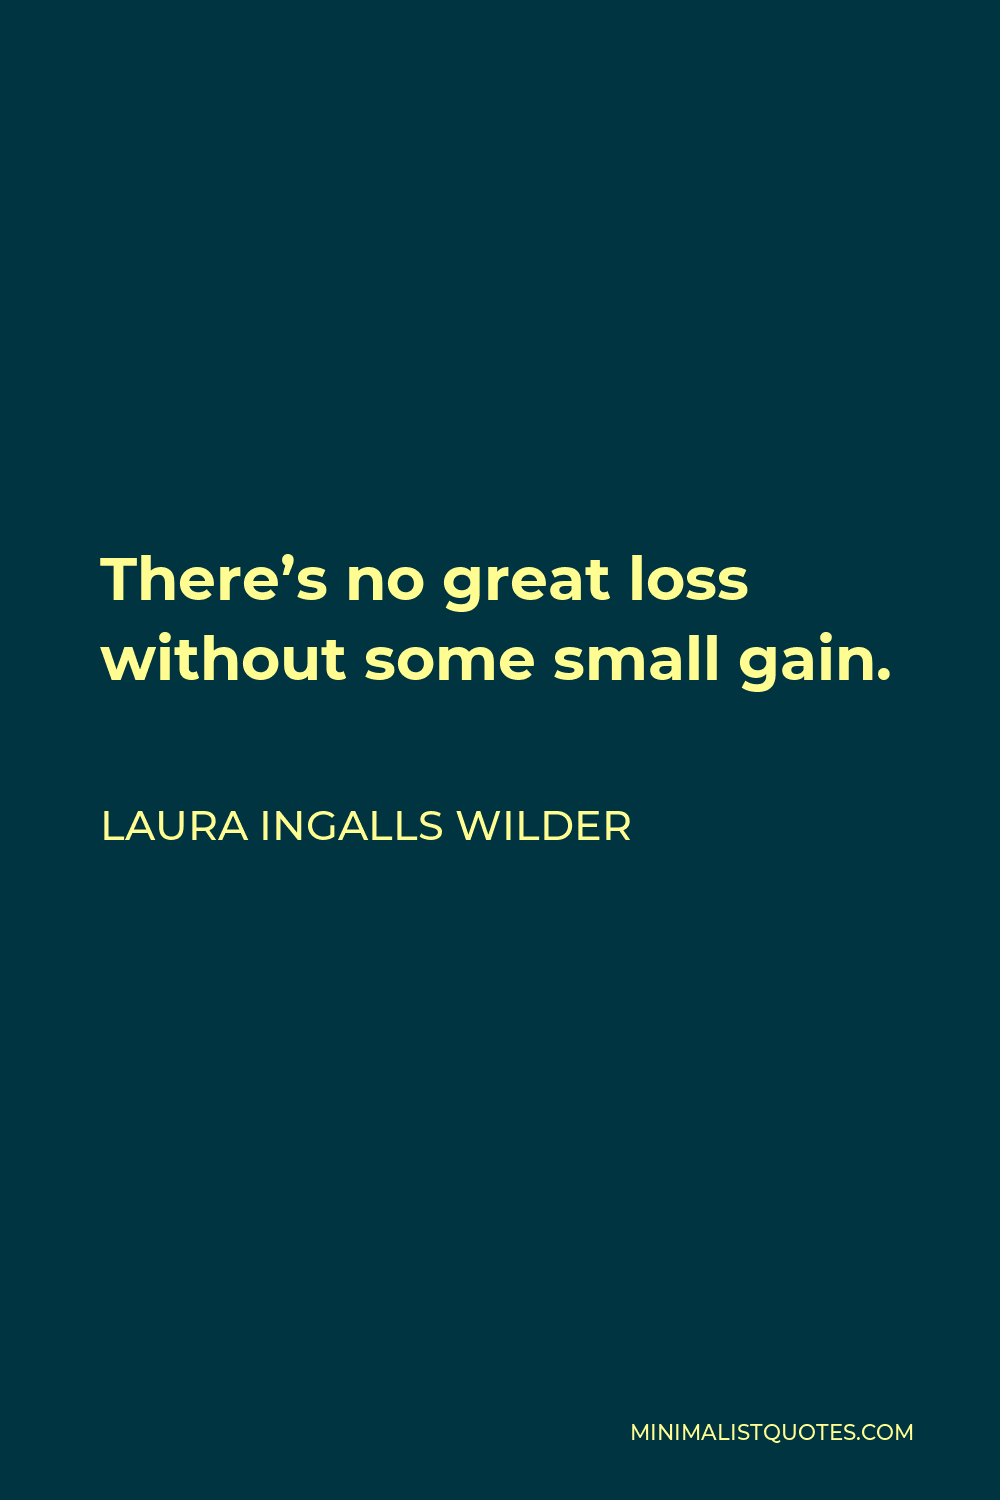 Laura Ingalls Wilder Quote - There’s no great loss without some small gain.